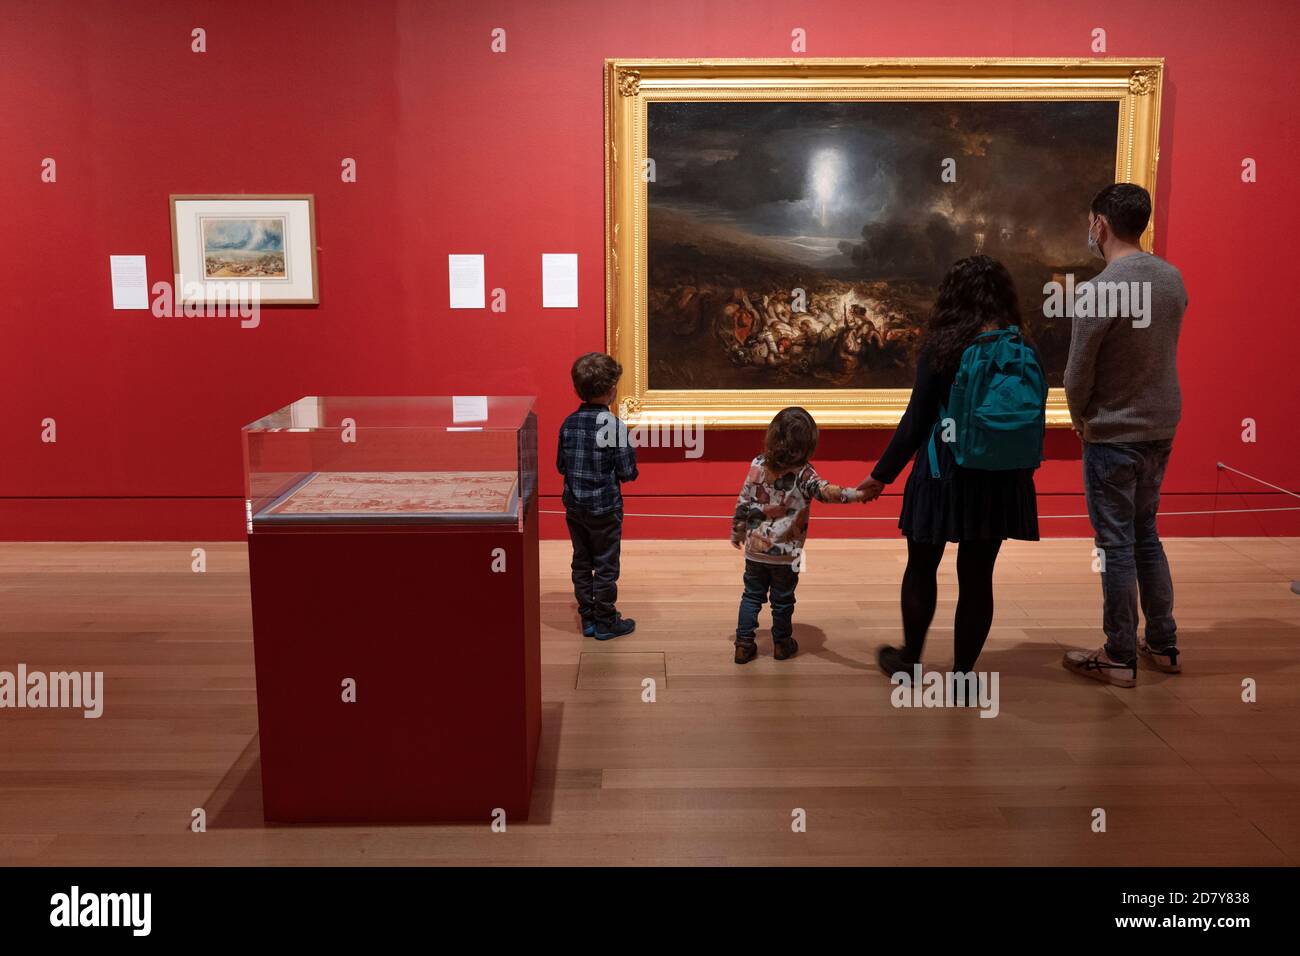 London, England. 26th October 2020. A family looking at Turner’s artwork during the press viewing of Turner’s Modern World at the Tate Britain. Opening on the 28th October 2020, its a major exhibition is dedicated to JMW Turner (1775-1851). Turner’s Modern World reveals how the British landscape painter found new ways to capture daily events, from technology’s impact on the natural world to the effects of modernisation on society. (photo by Sam Mellish / Alamy Live News) Stock Photo